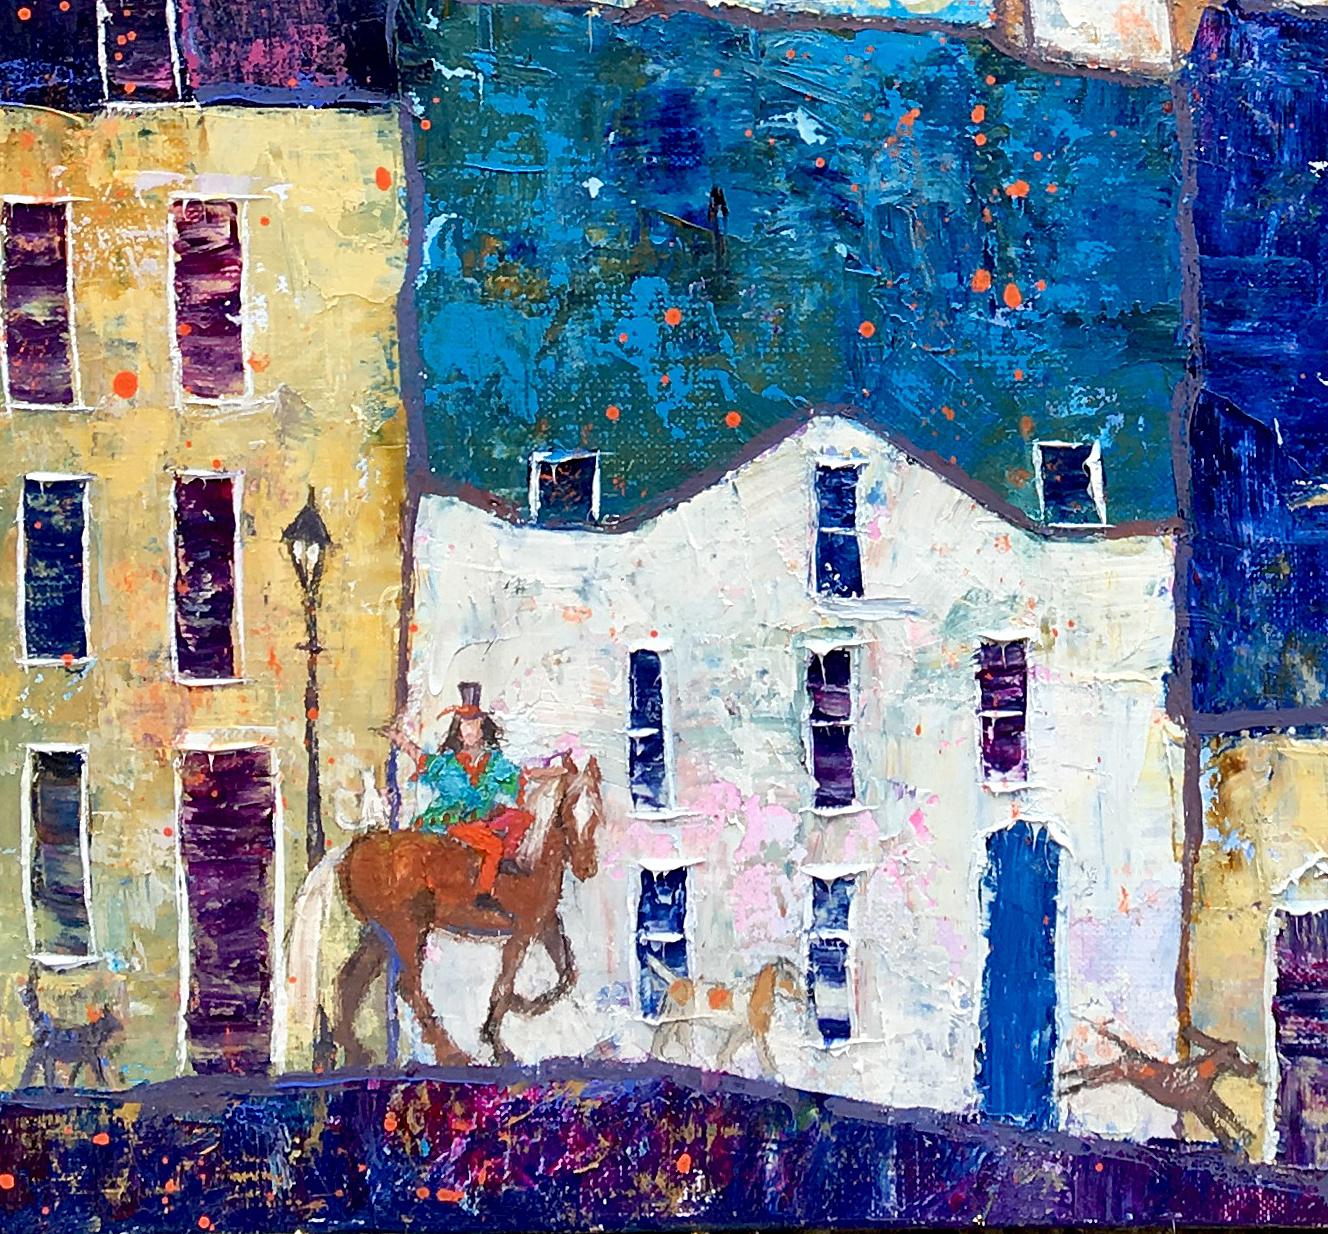 Me, Myself and I -vibrant blue and white townscape horse oil on canvas - Painting by Ellie Hesse